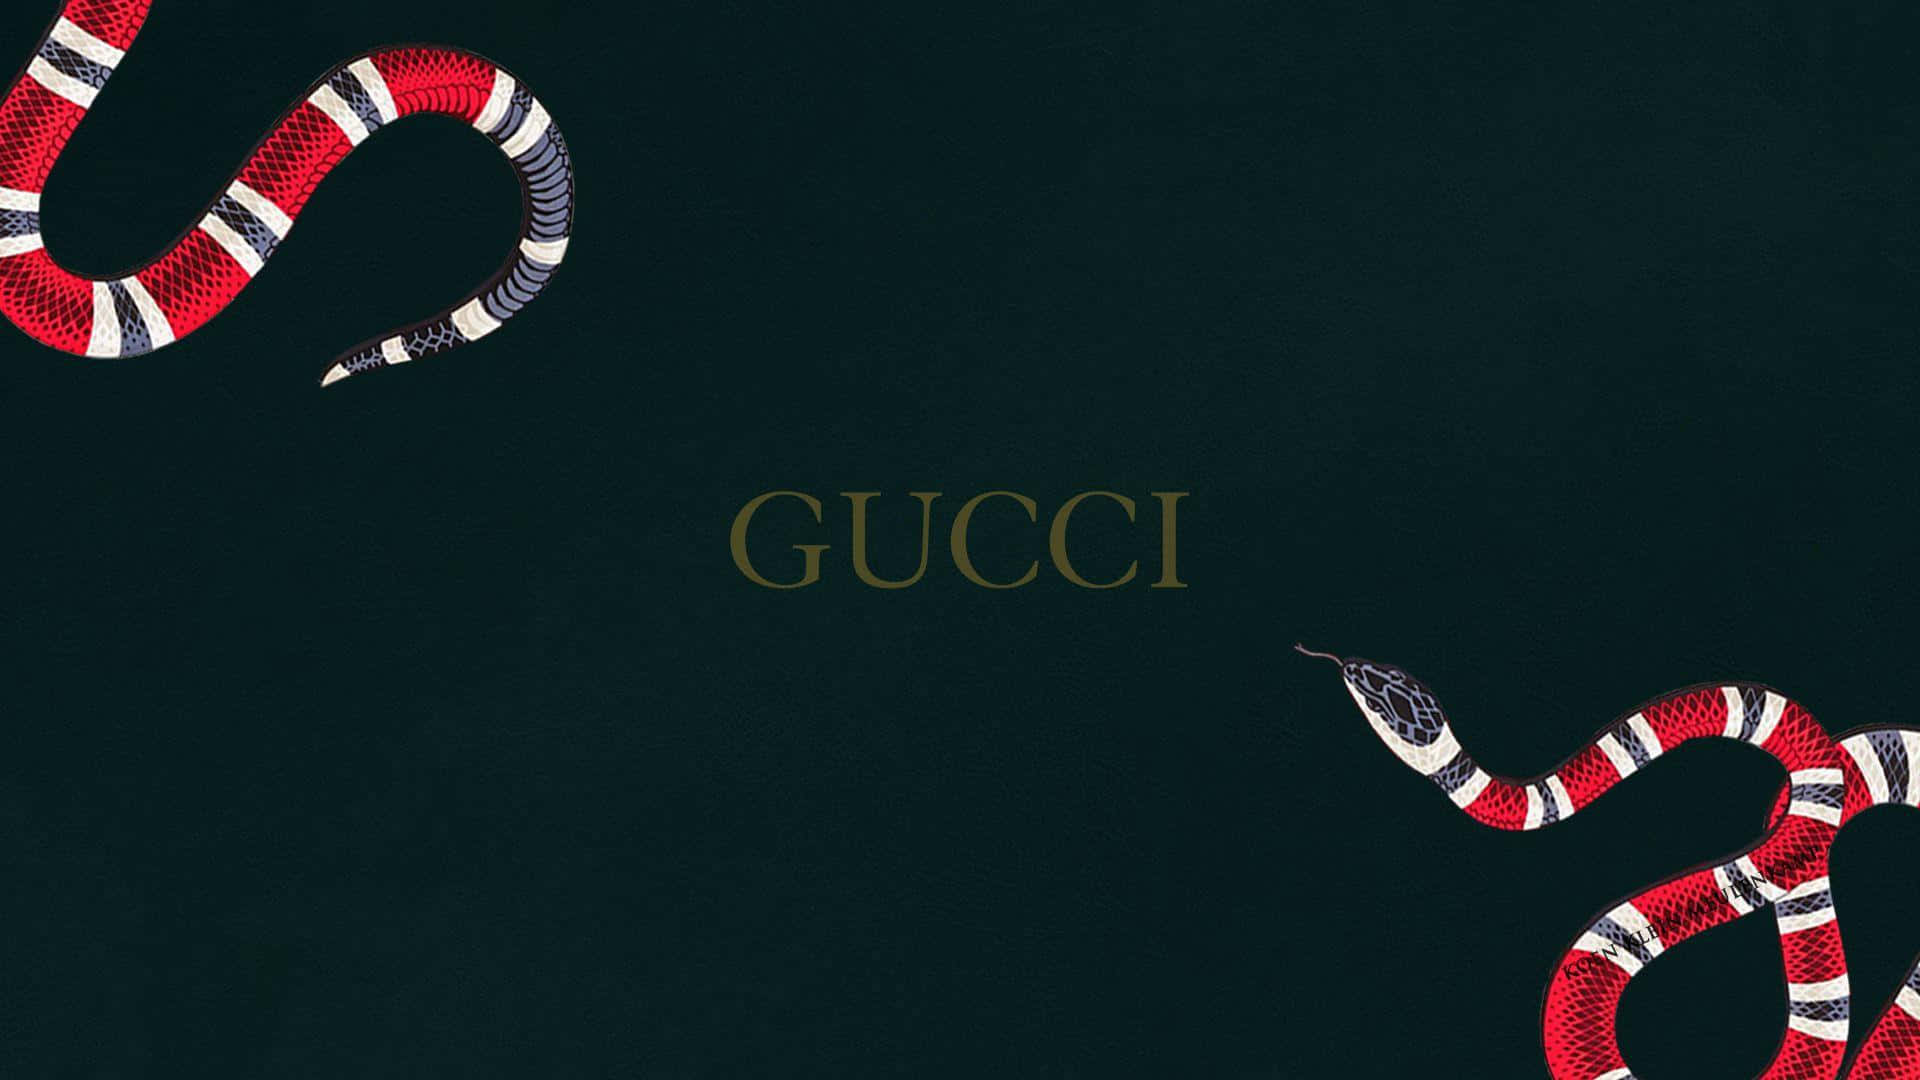 Gucci Snakes On A Black Background Wallpaper